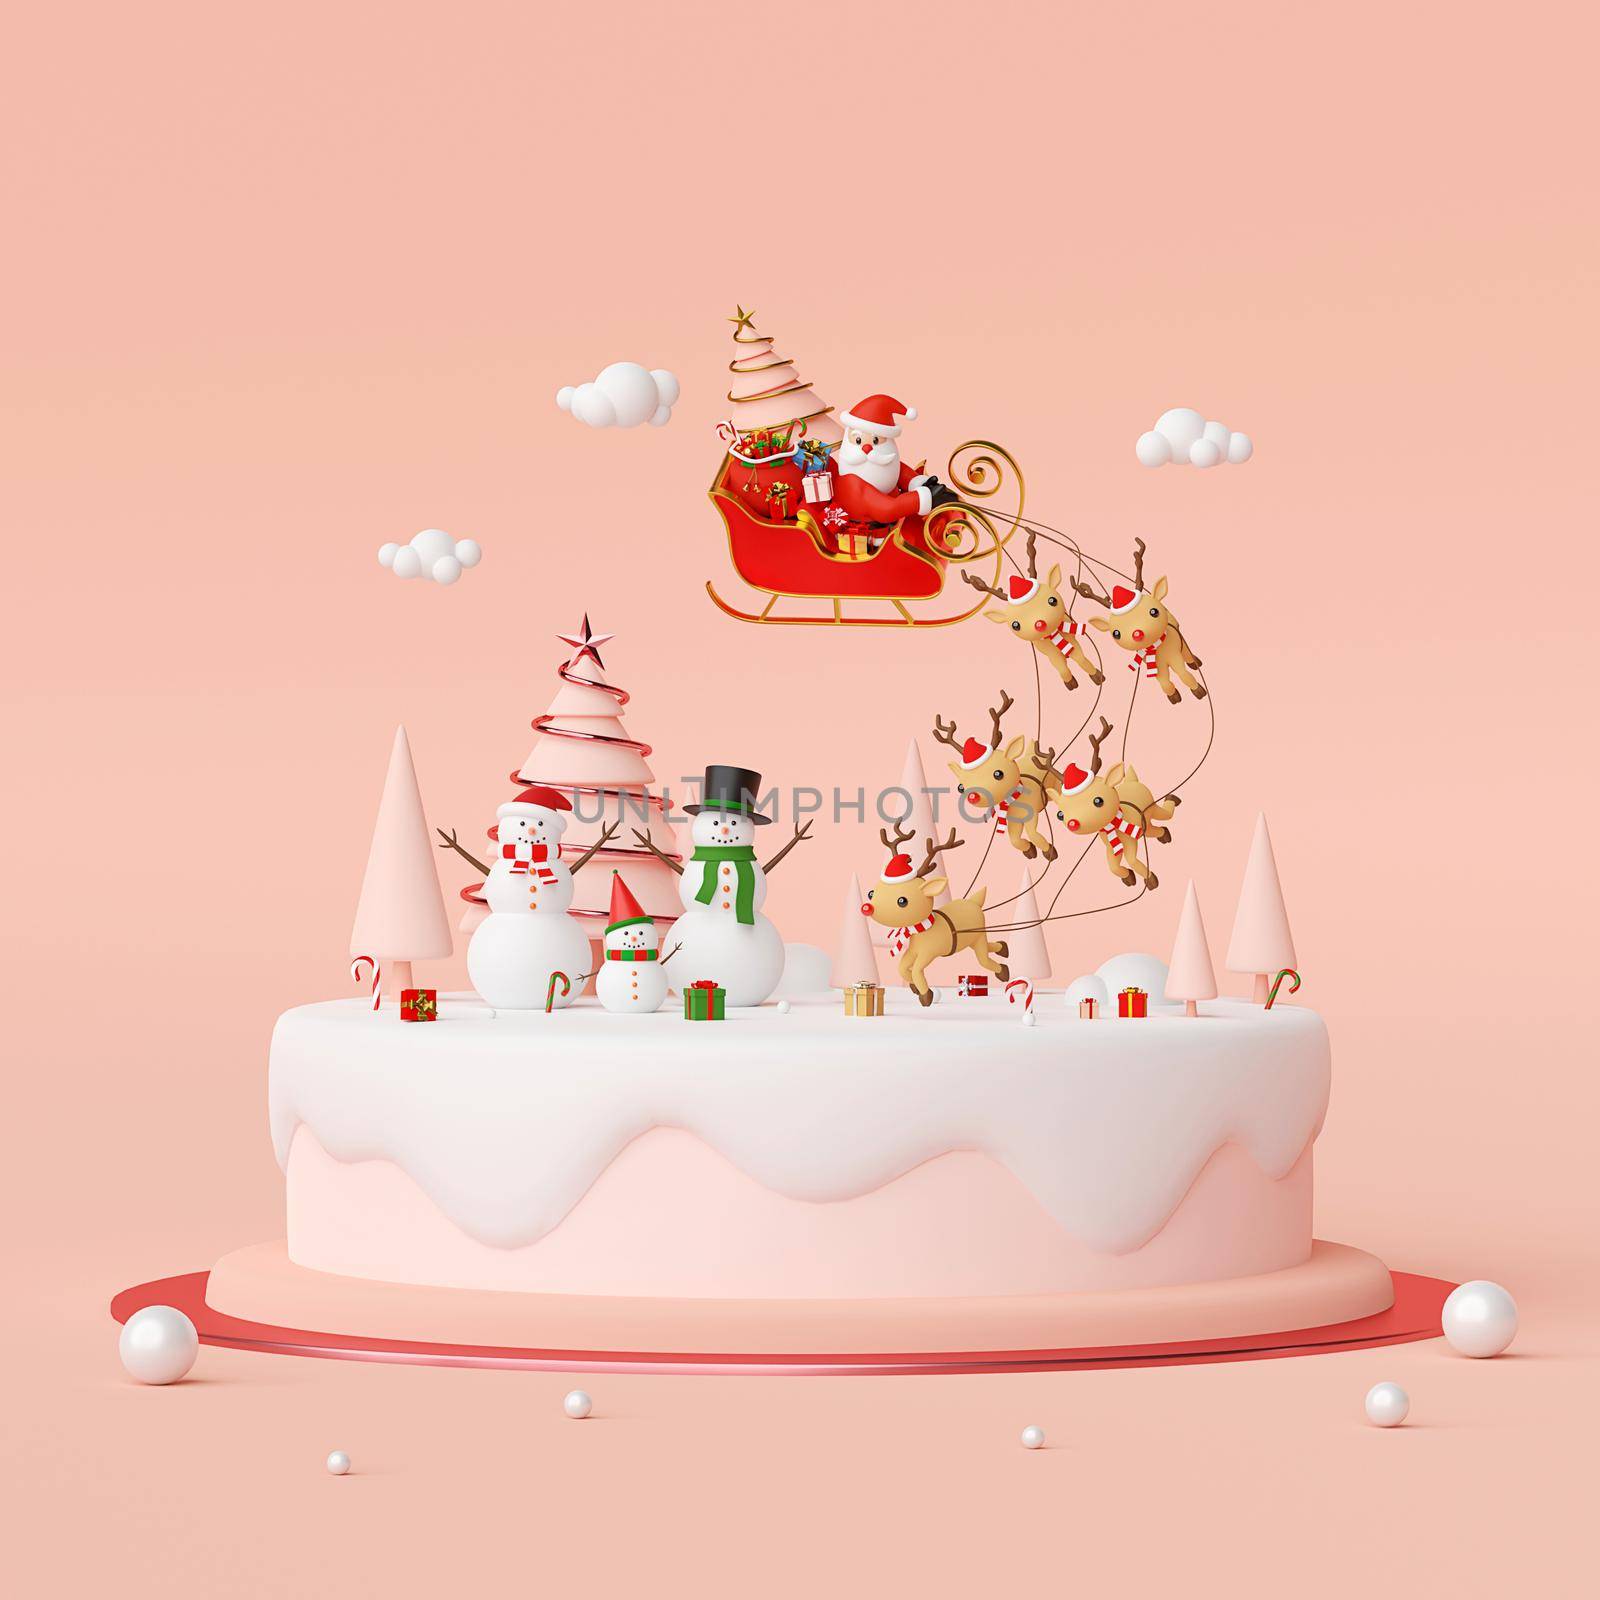 Scene of Santa Claus on a sleigh full of Christmas gifts and pulled by reindeer with snowman, 3d rendering